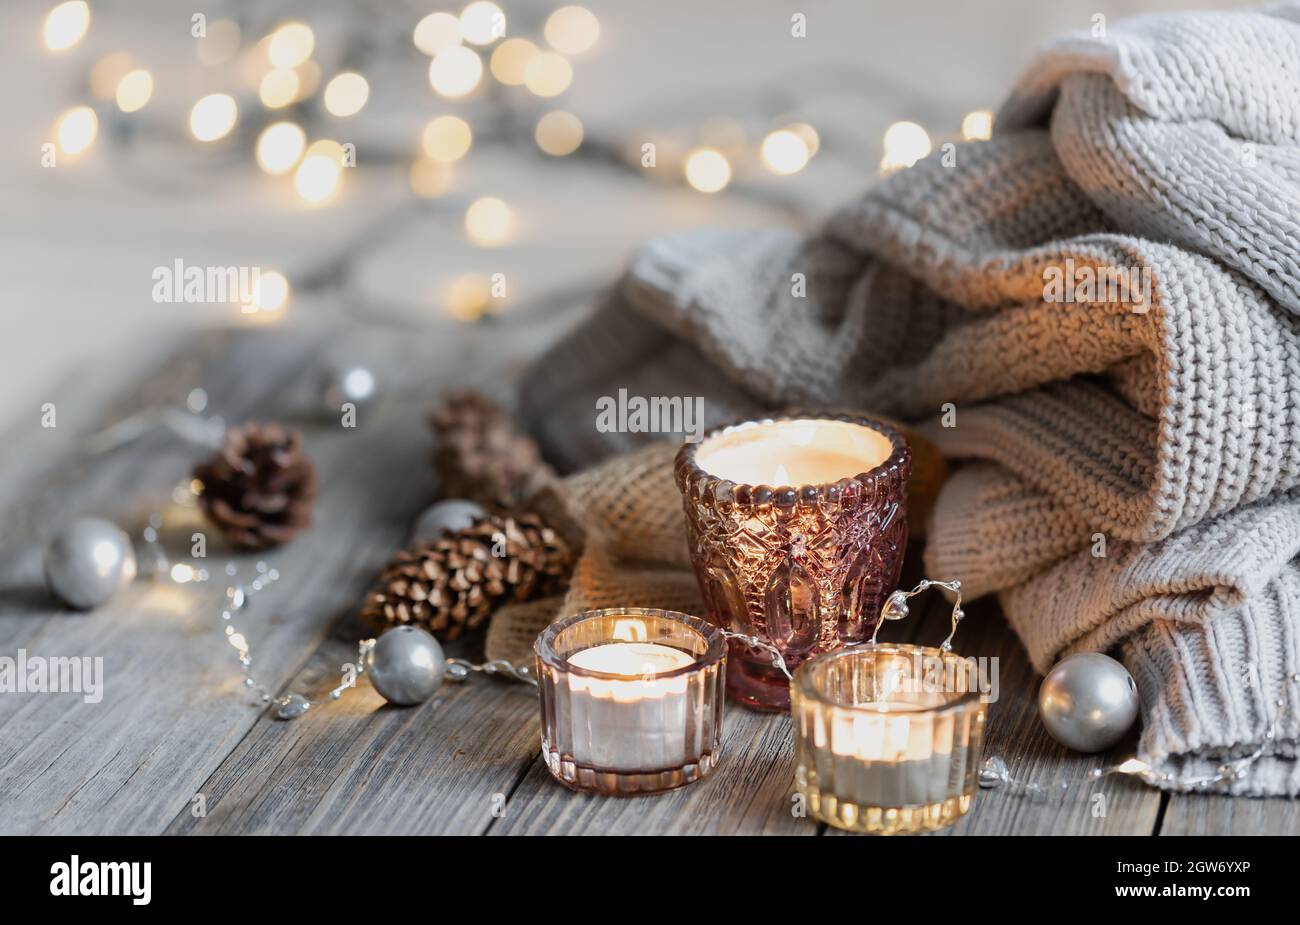 Cozy winter background with burning candles, decorative details